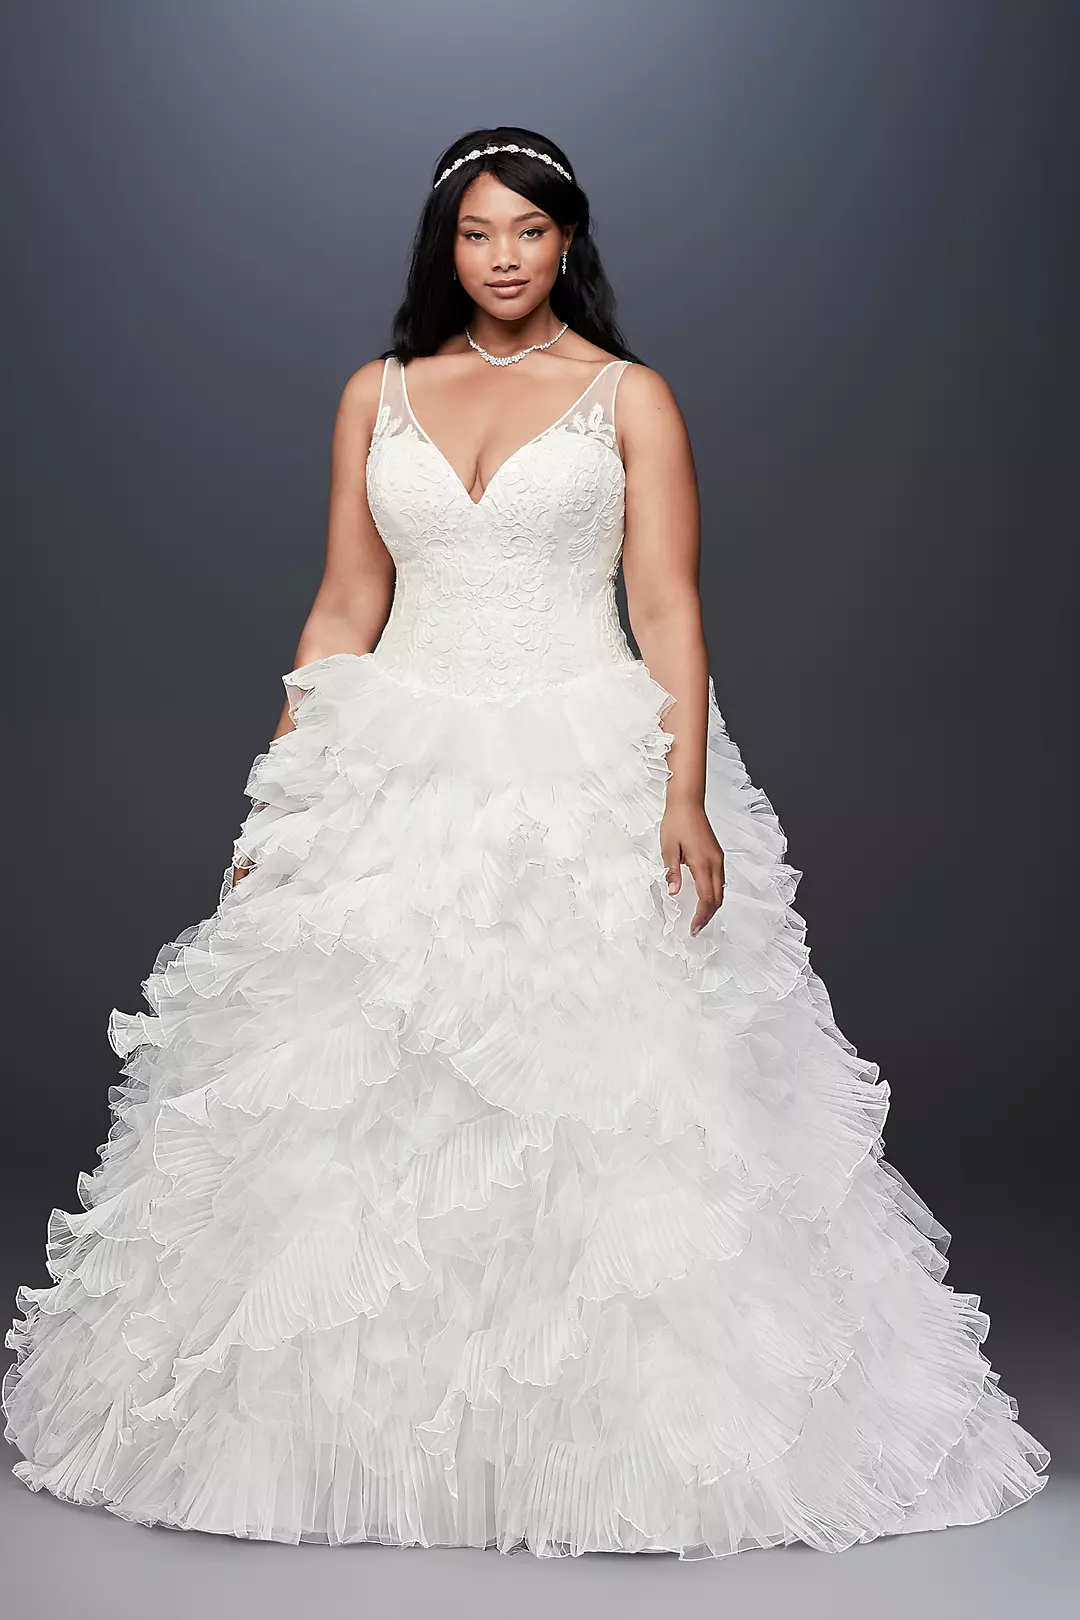 Plunging V-Neck Wedding Gown with Tiered Skirt Image